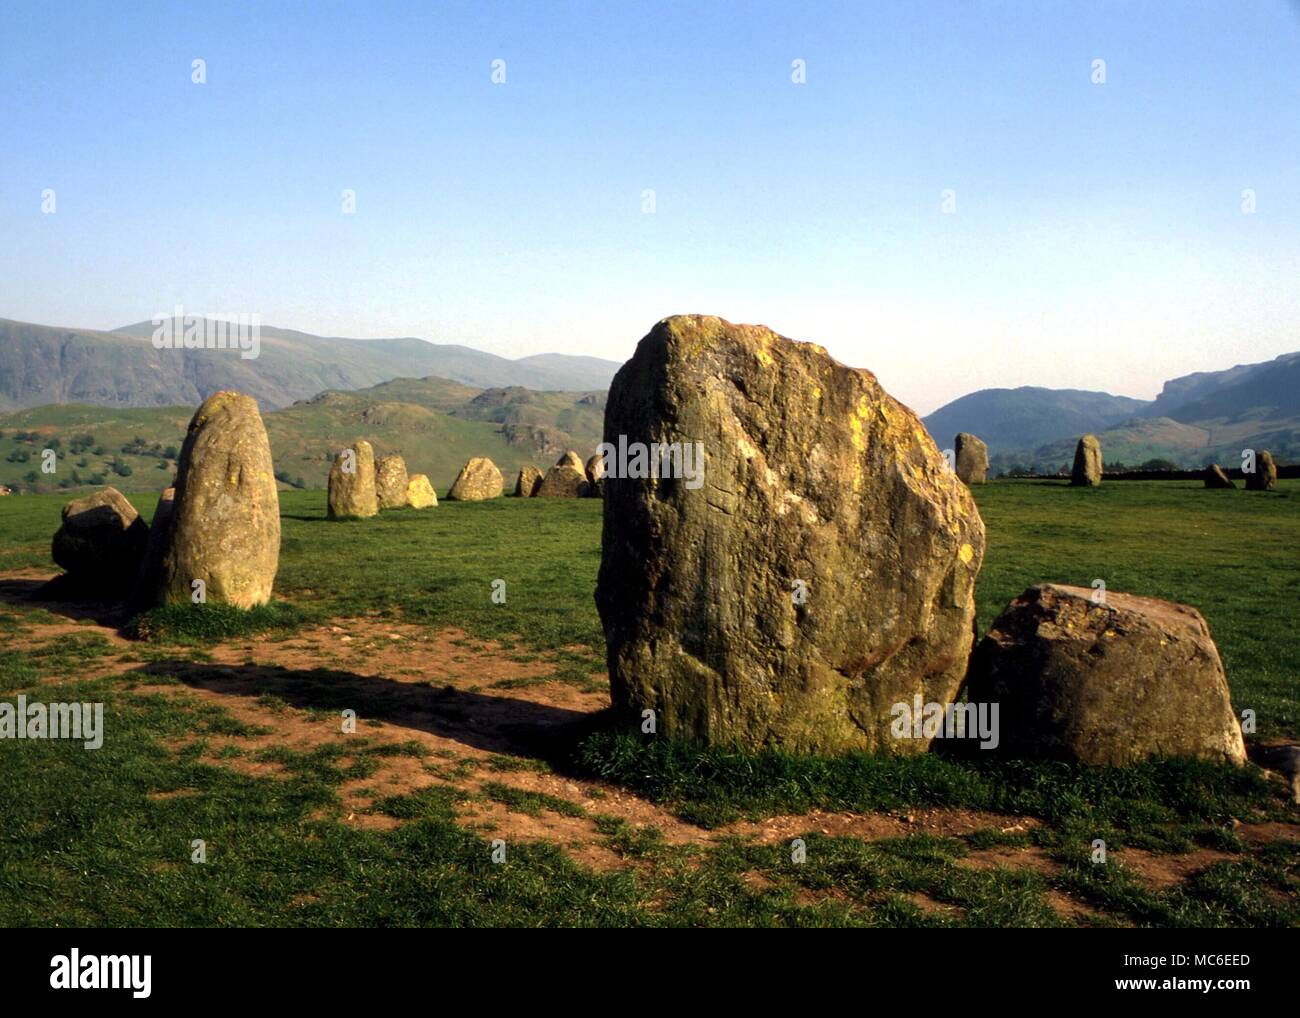 Stone Circles - Castlerigg The 'Carles' of Castlerigg Circle near Keswick in Cumbria, consists of 38 upright stones set in a maximum diameter of 107 feet, with a ten-stone circle in the outer ring. Probably c. 2,500 BC Stock Photo